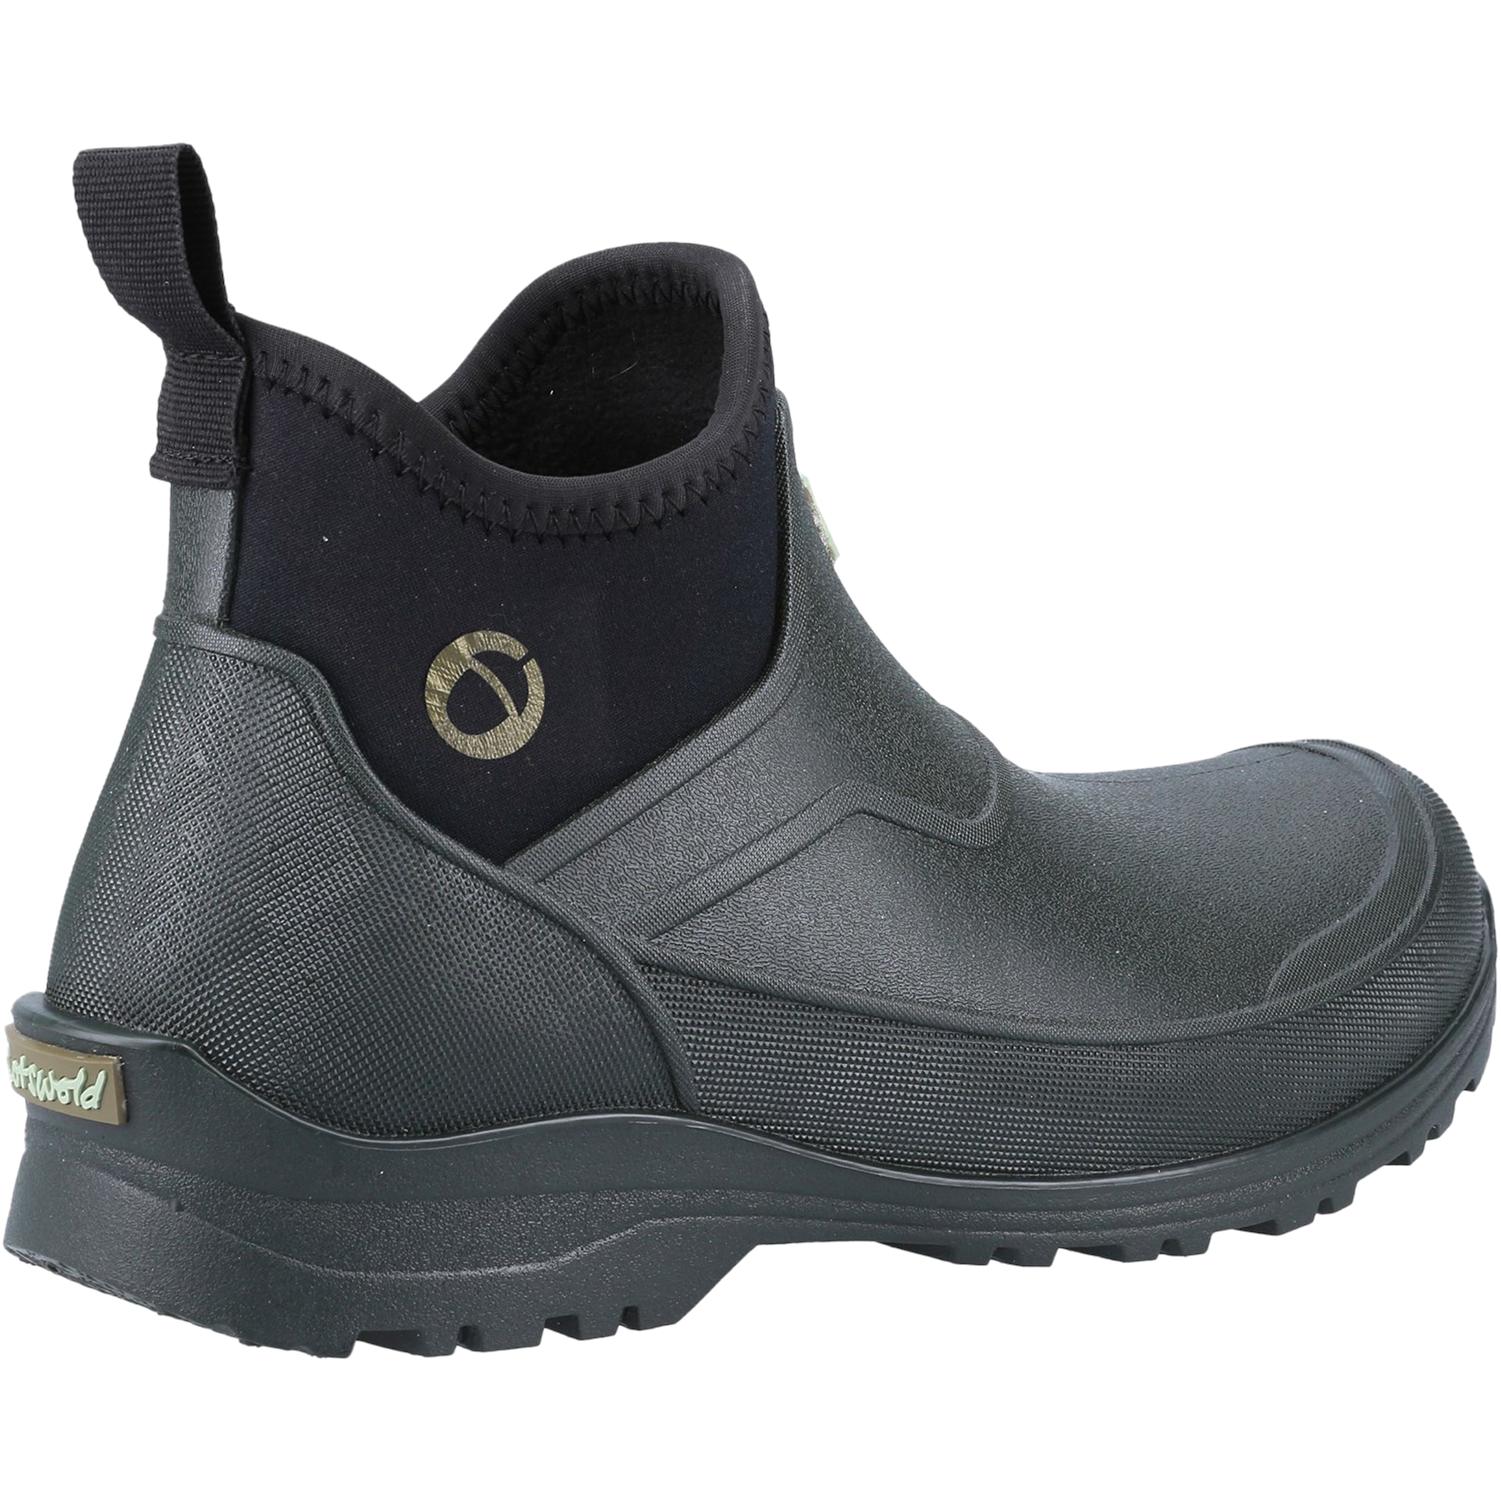 Cotswold Coleford Wellington Boots